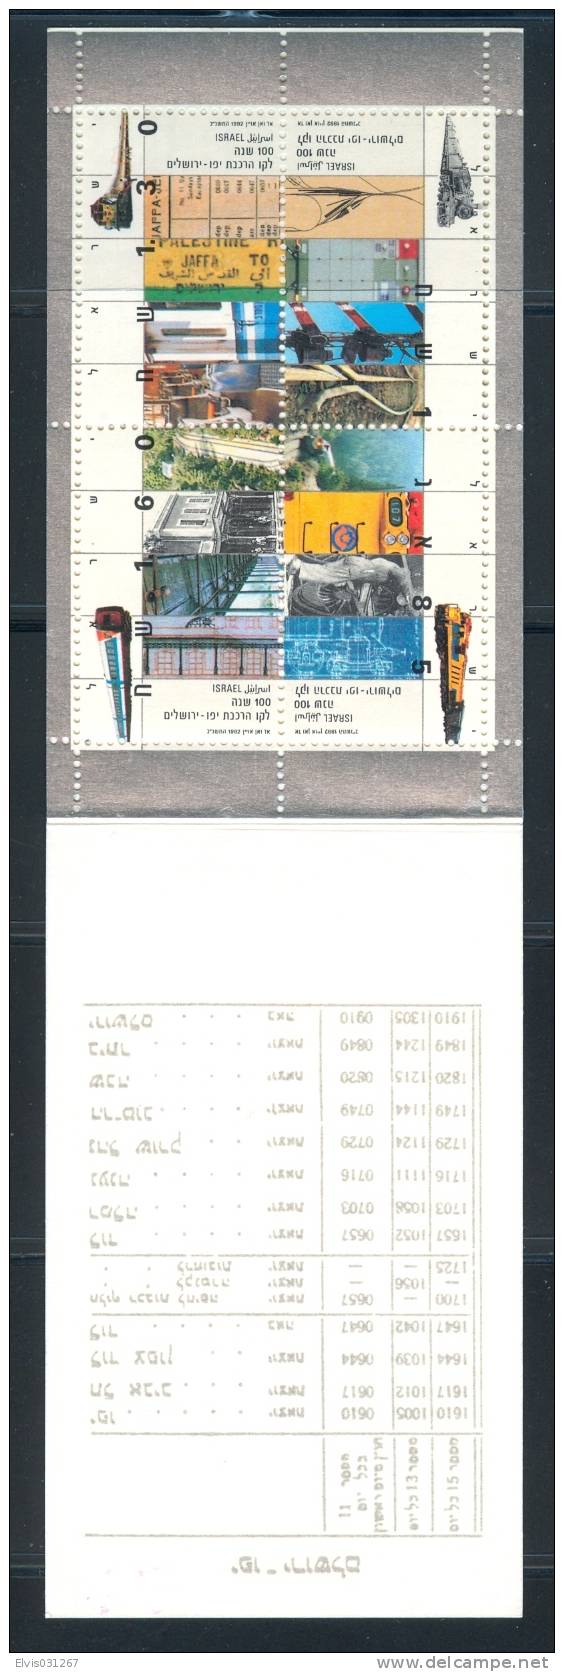 Israel BOOKLET - 1992, Michel/Philex Nr. : 1226-1229, - MNH - Mint Condition - Booklets